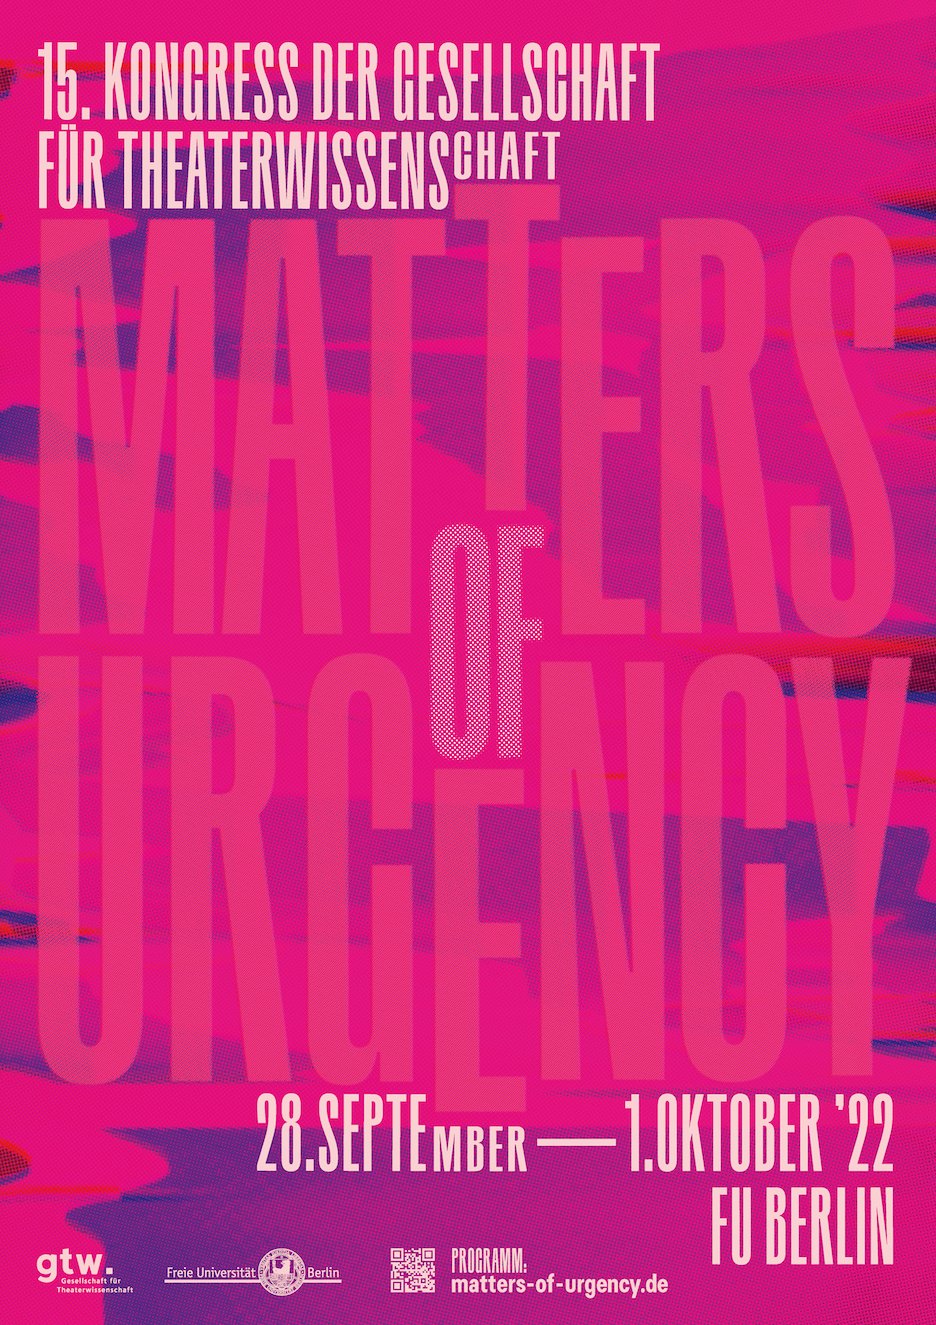 "Matters of Urgency" - 15th Congress of the Society for Theatre Studies from 28.9.-1.10.2022